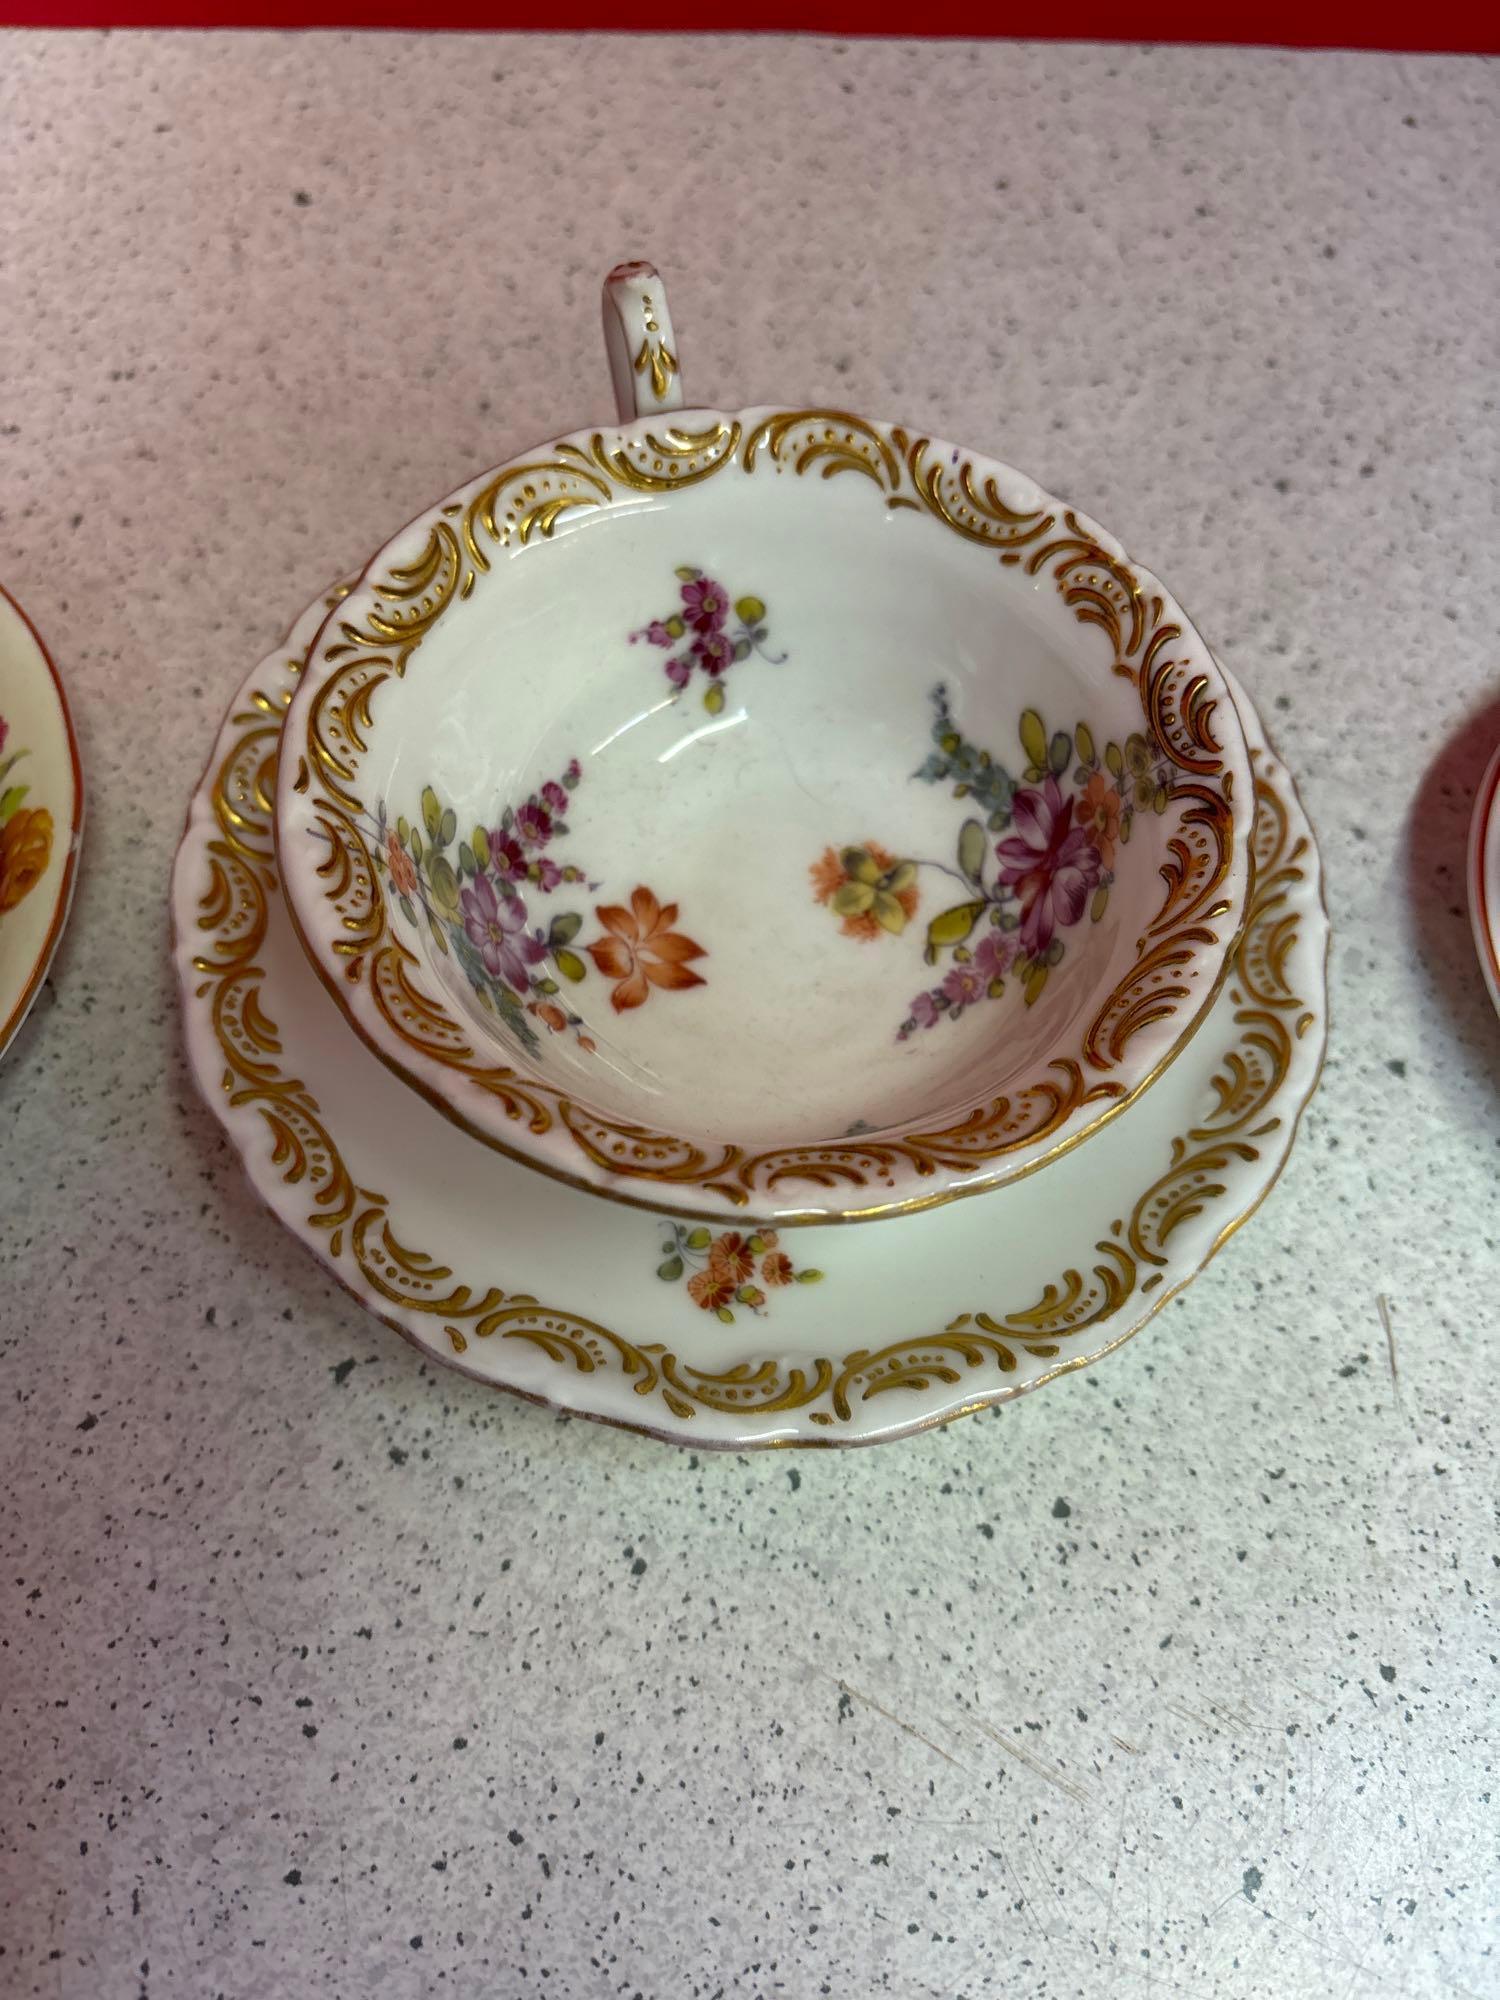 11 cup and saucer sets